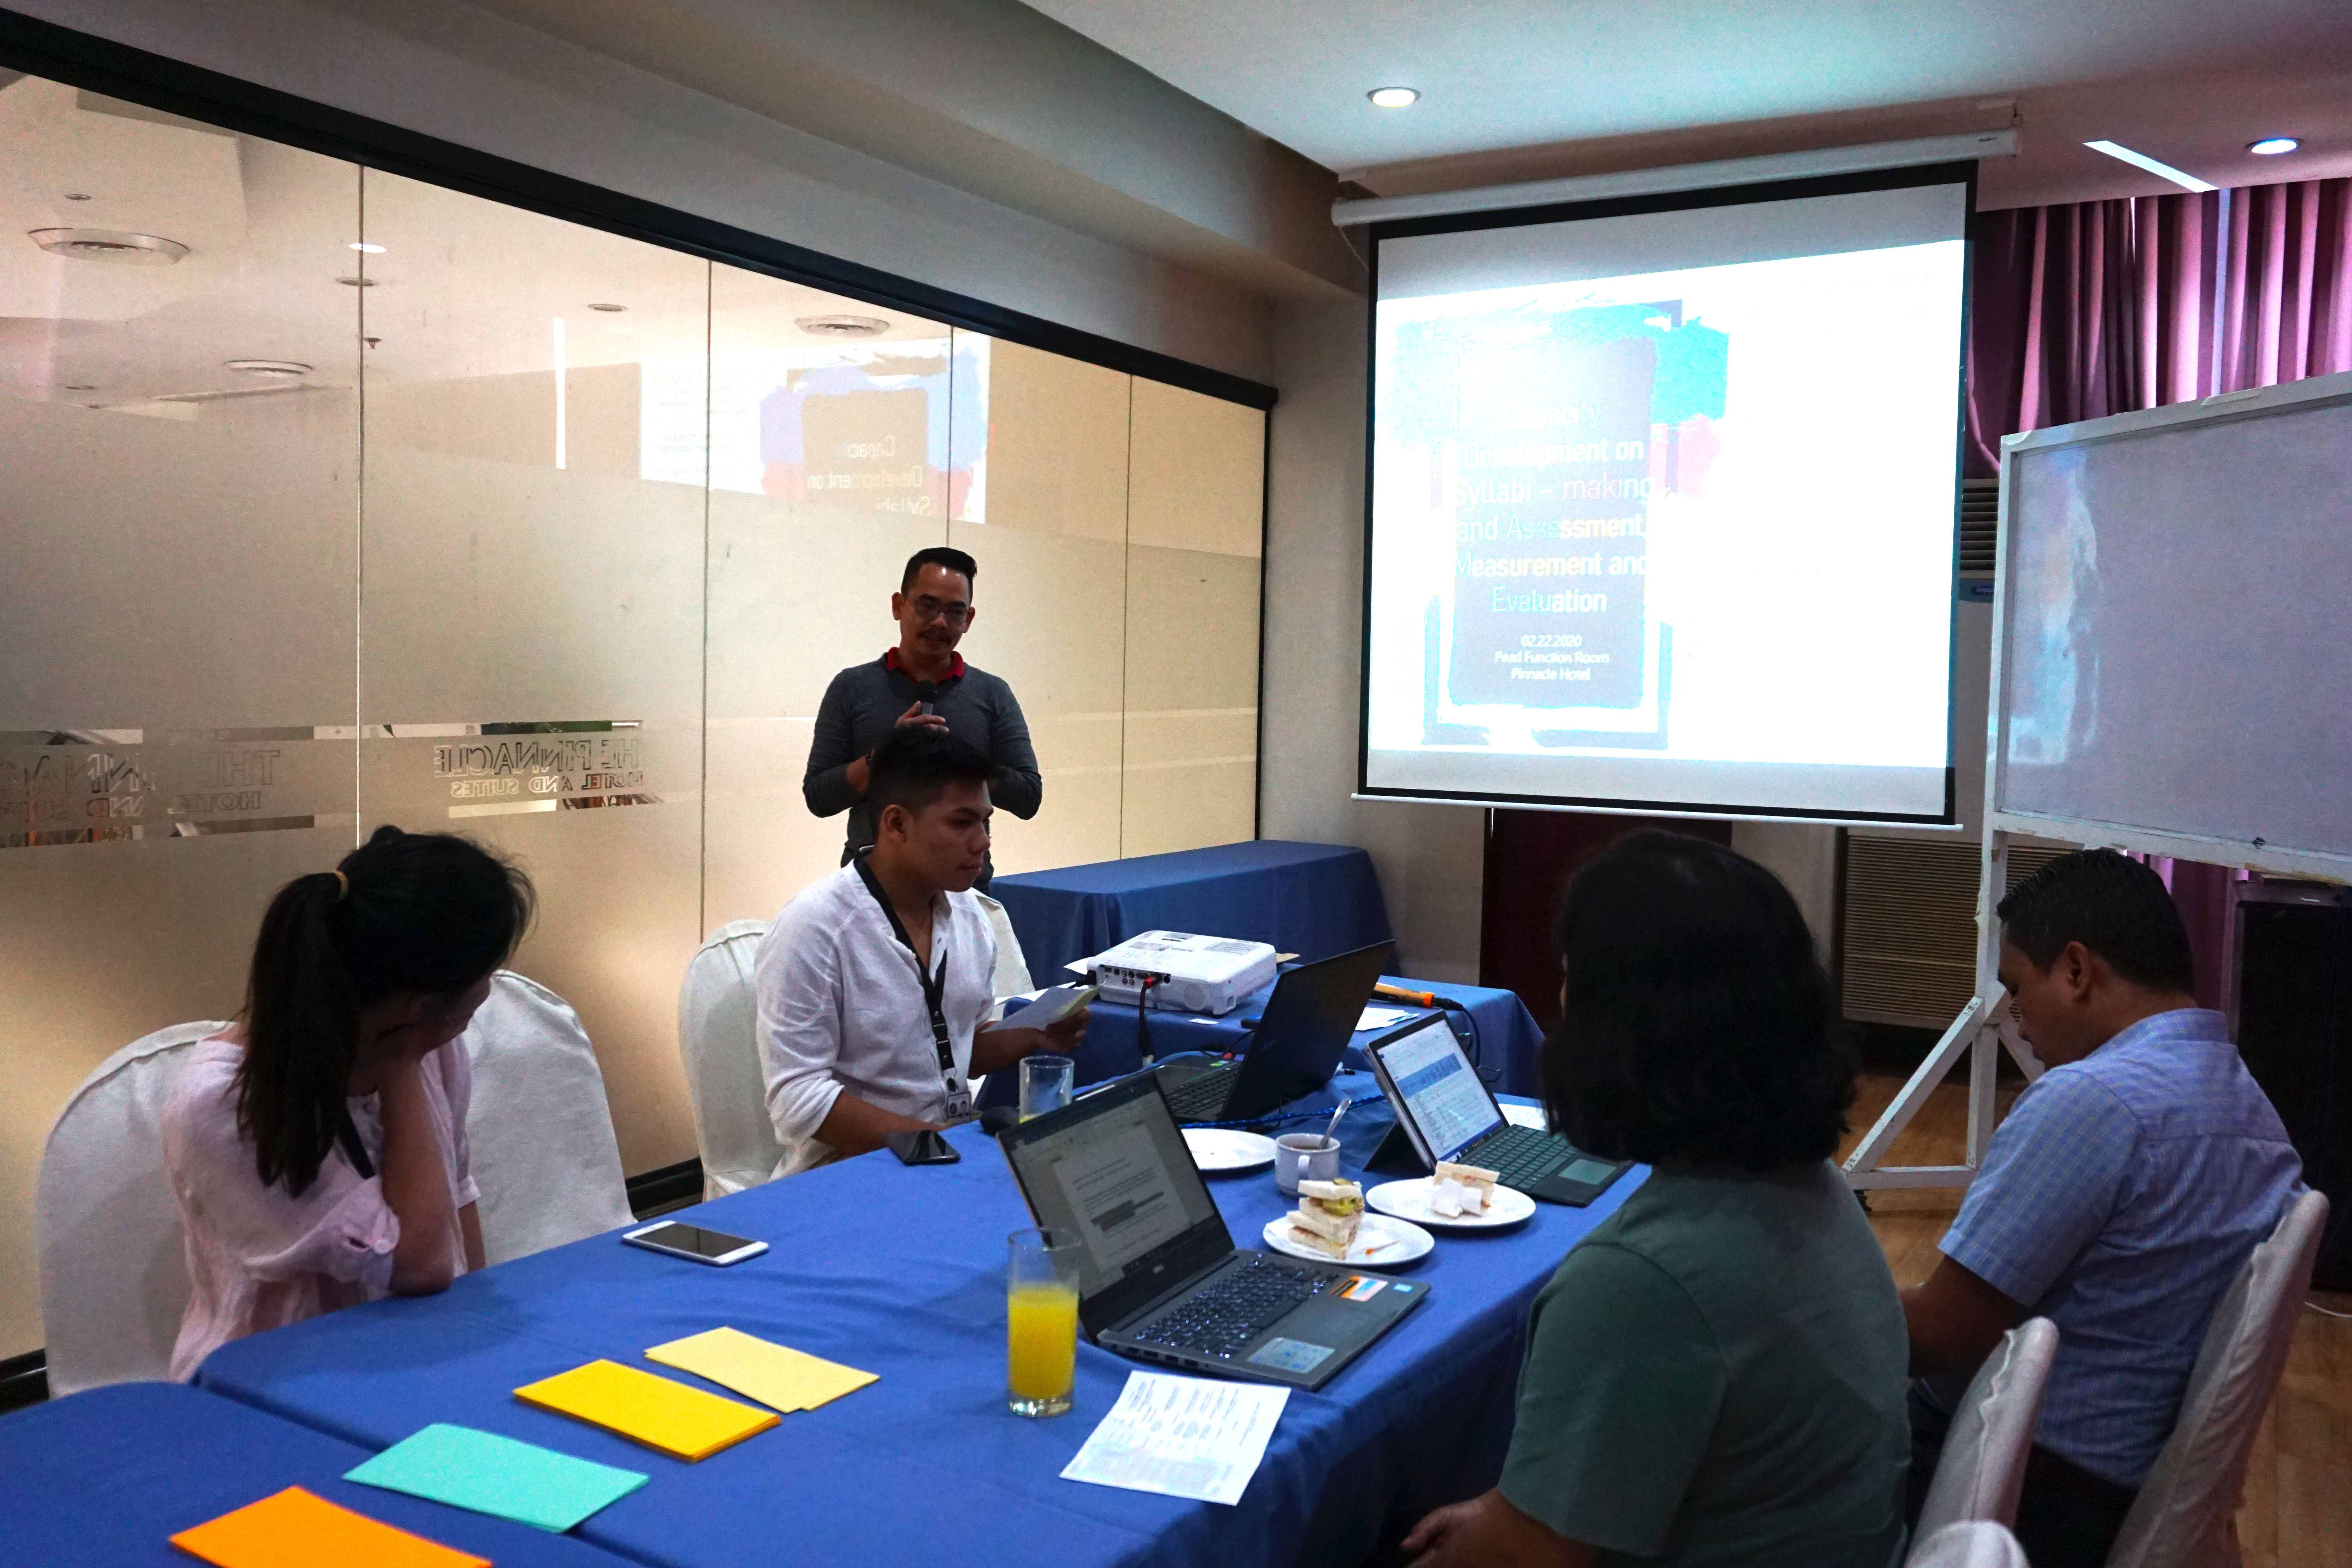 USeP leaps into an Outcomes-Based legal education